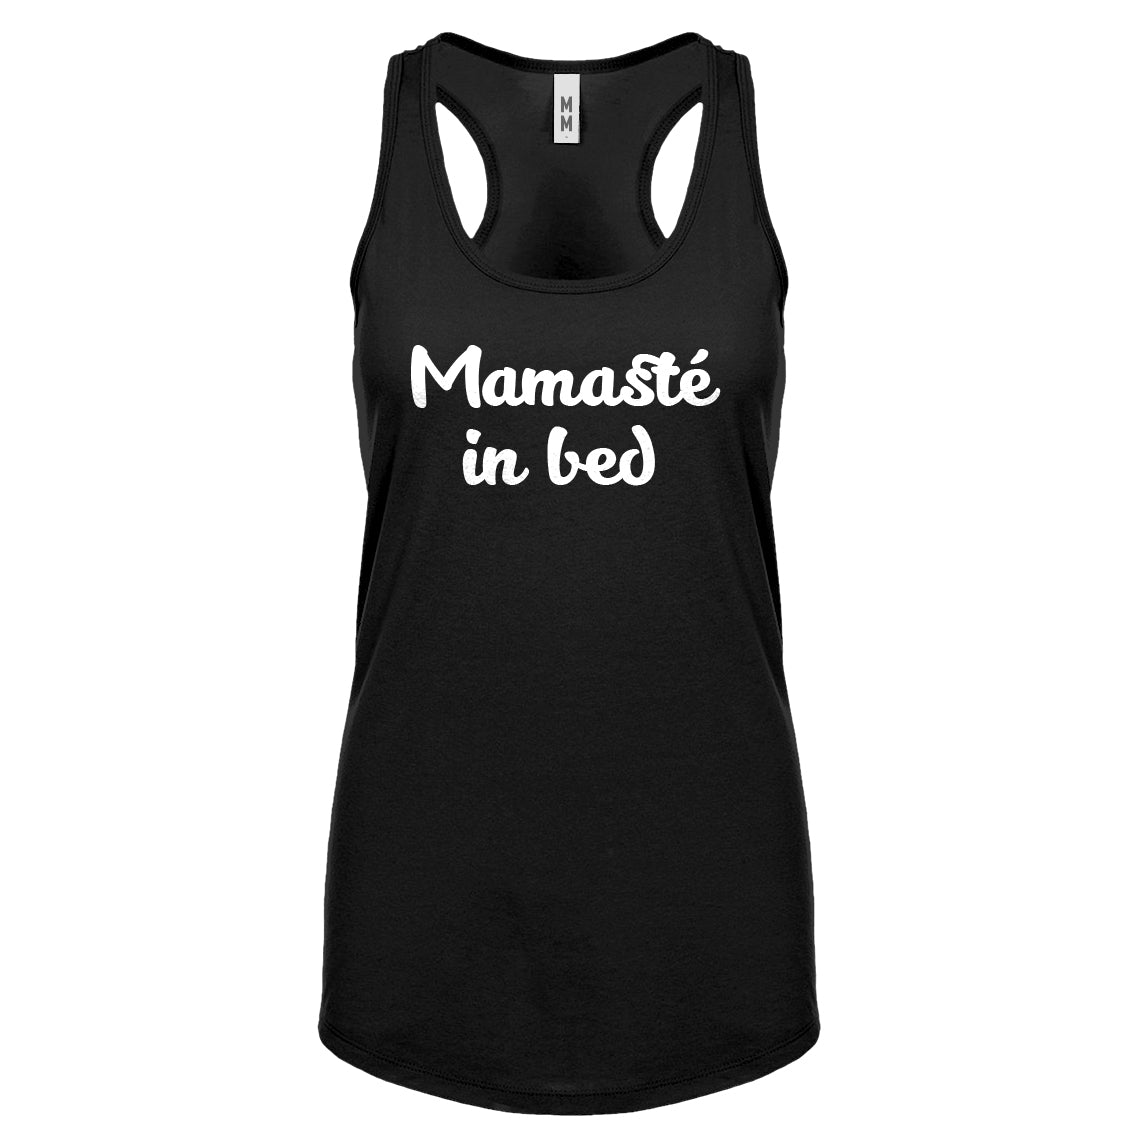 Racerback Mamaste in Bed Womens Tank Top